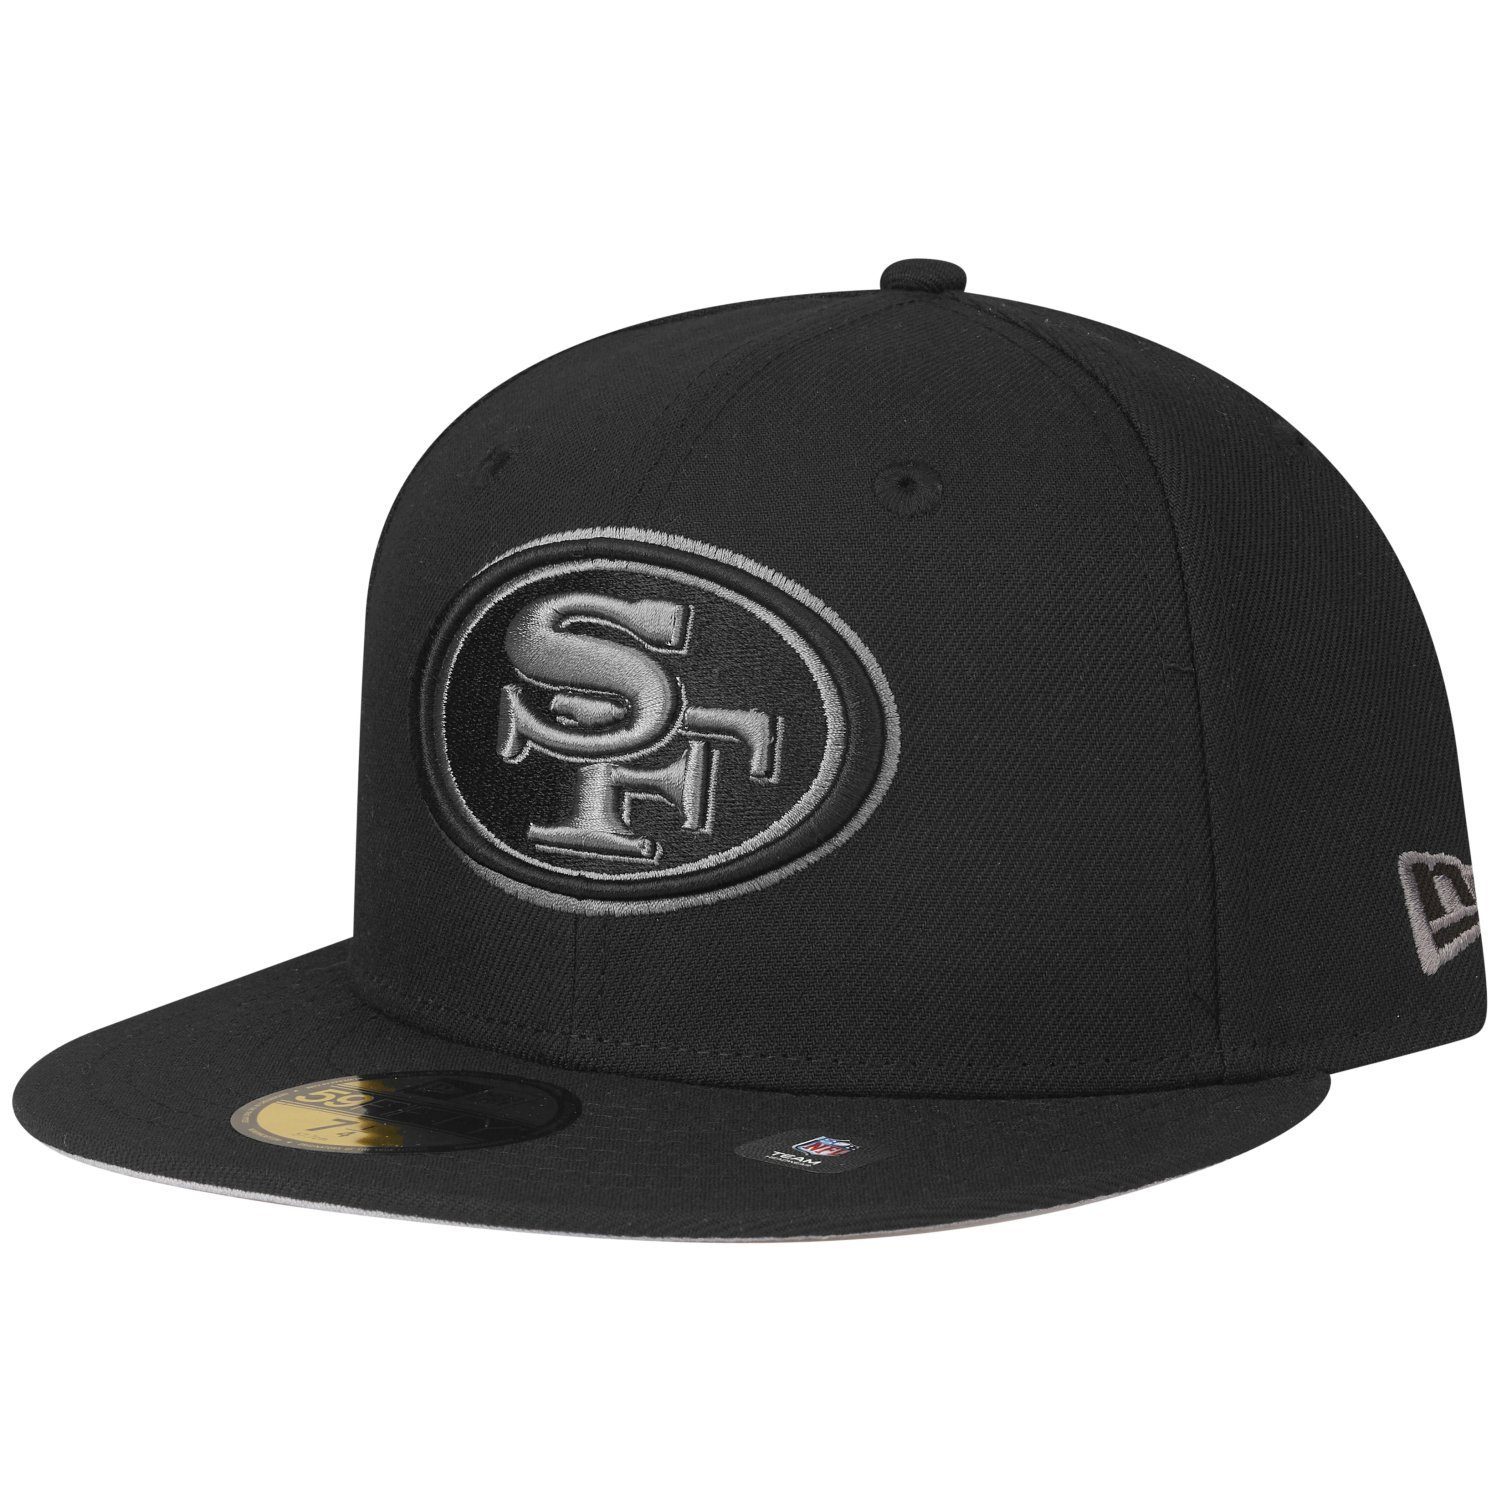 59Fifty Era TEAMS New NFL Francisco Fitted 49ers San Cap